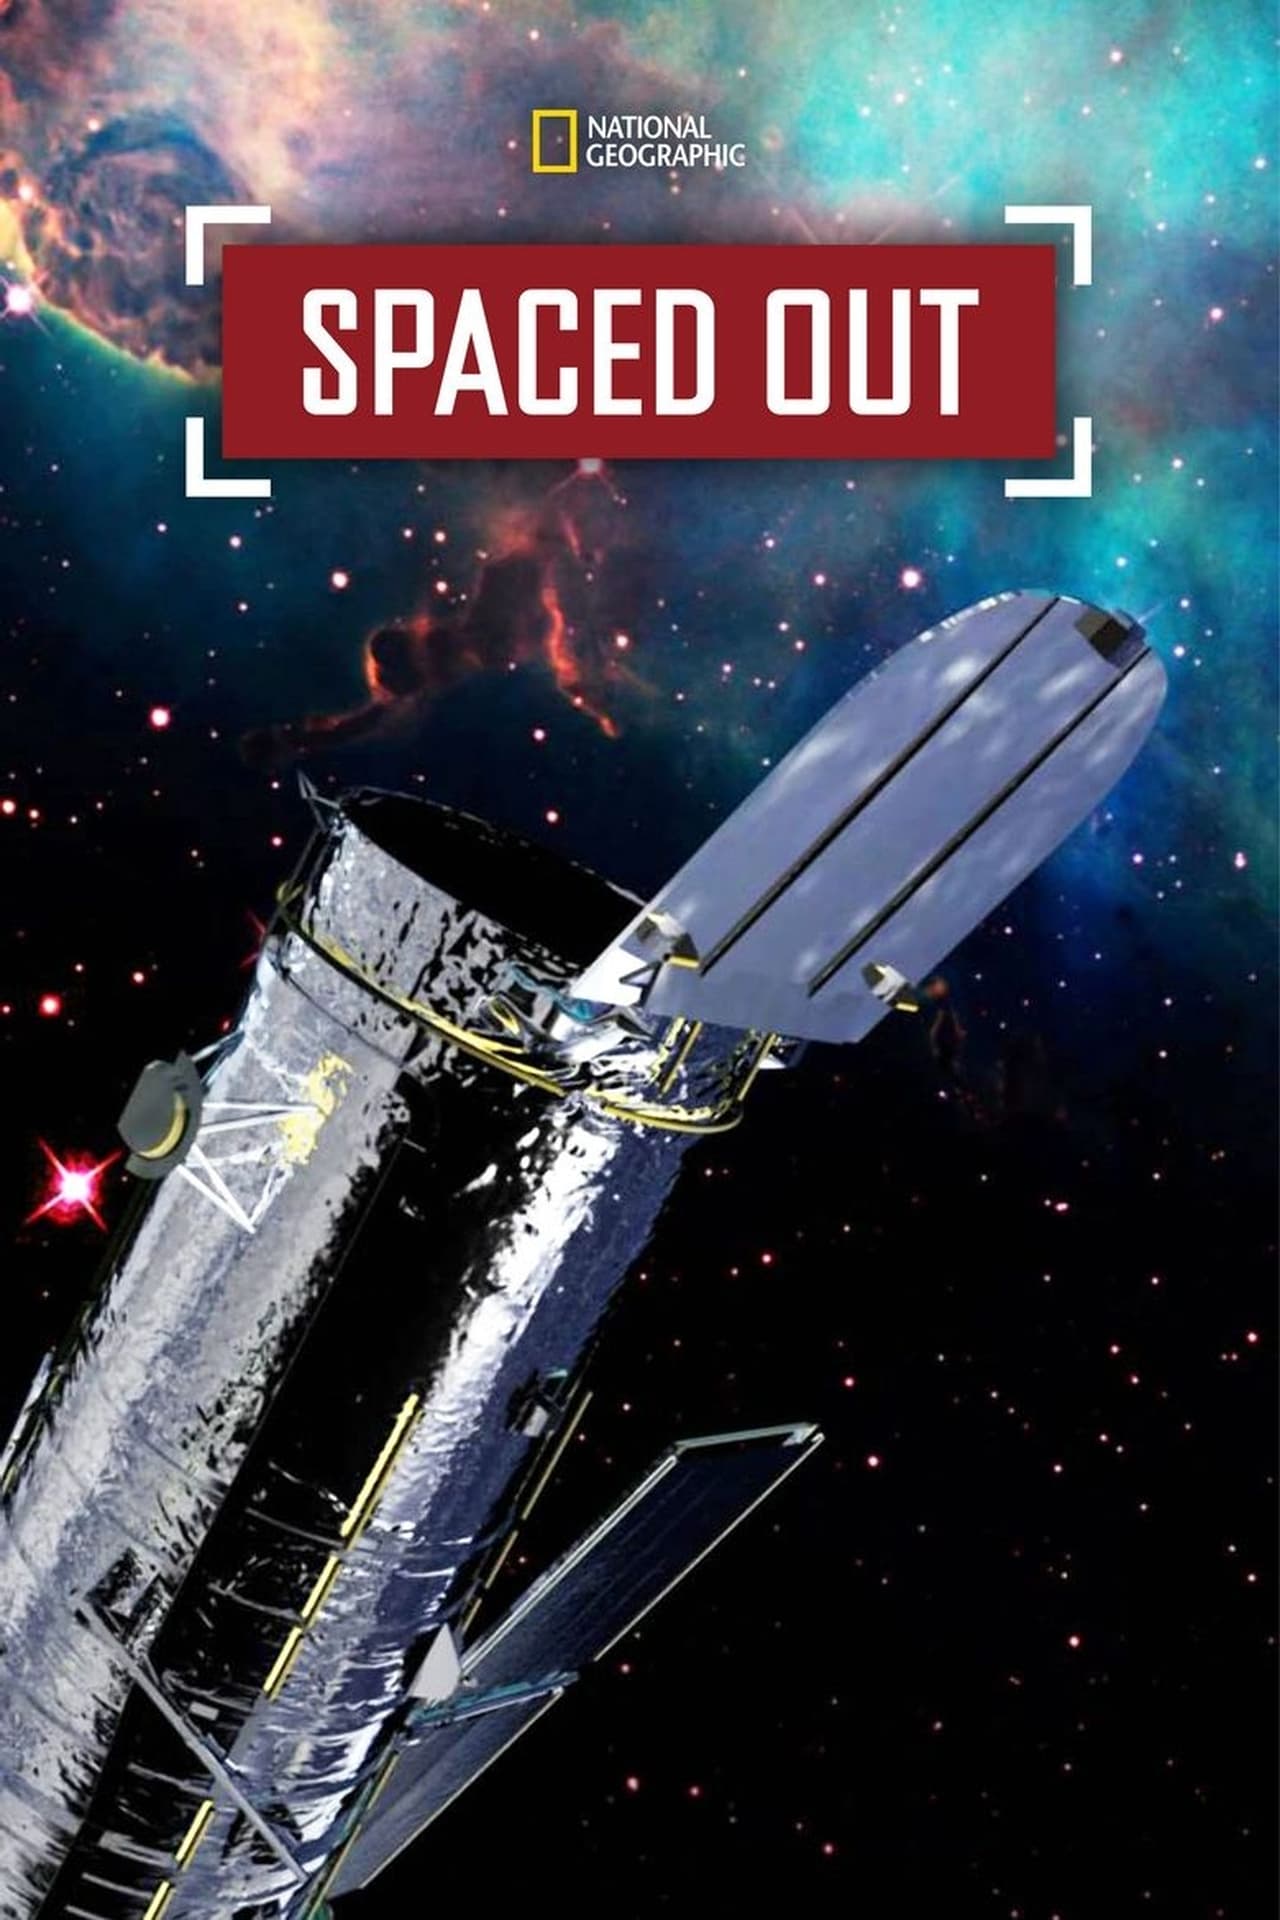 Spaced Out (2018) S1 EP01&EP05 256Kbps 29.970Fps 48Khz 5.1Ch Disney+ DD+ E-AC3 Turkish Audio TAC